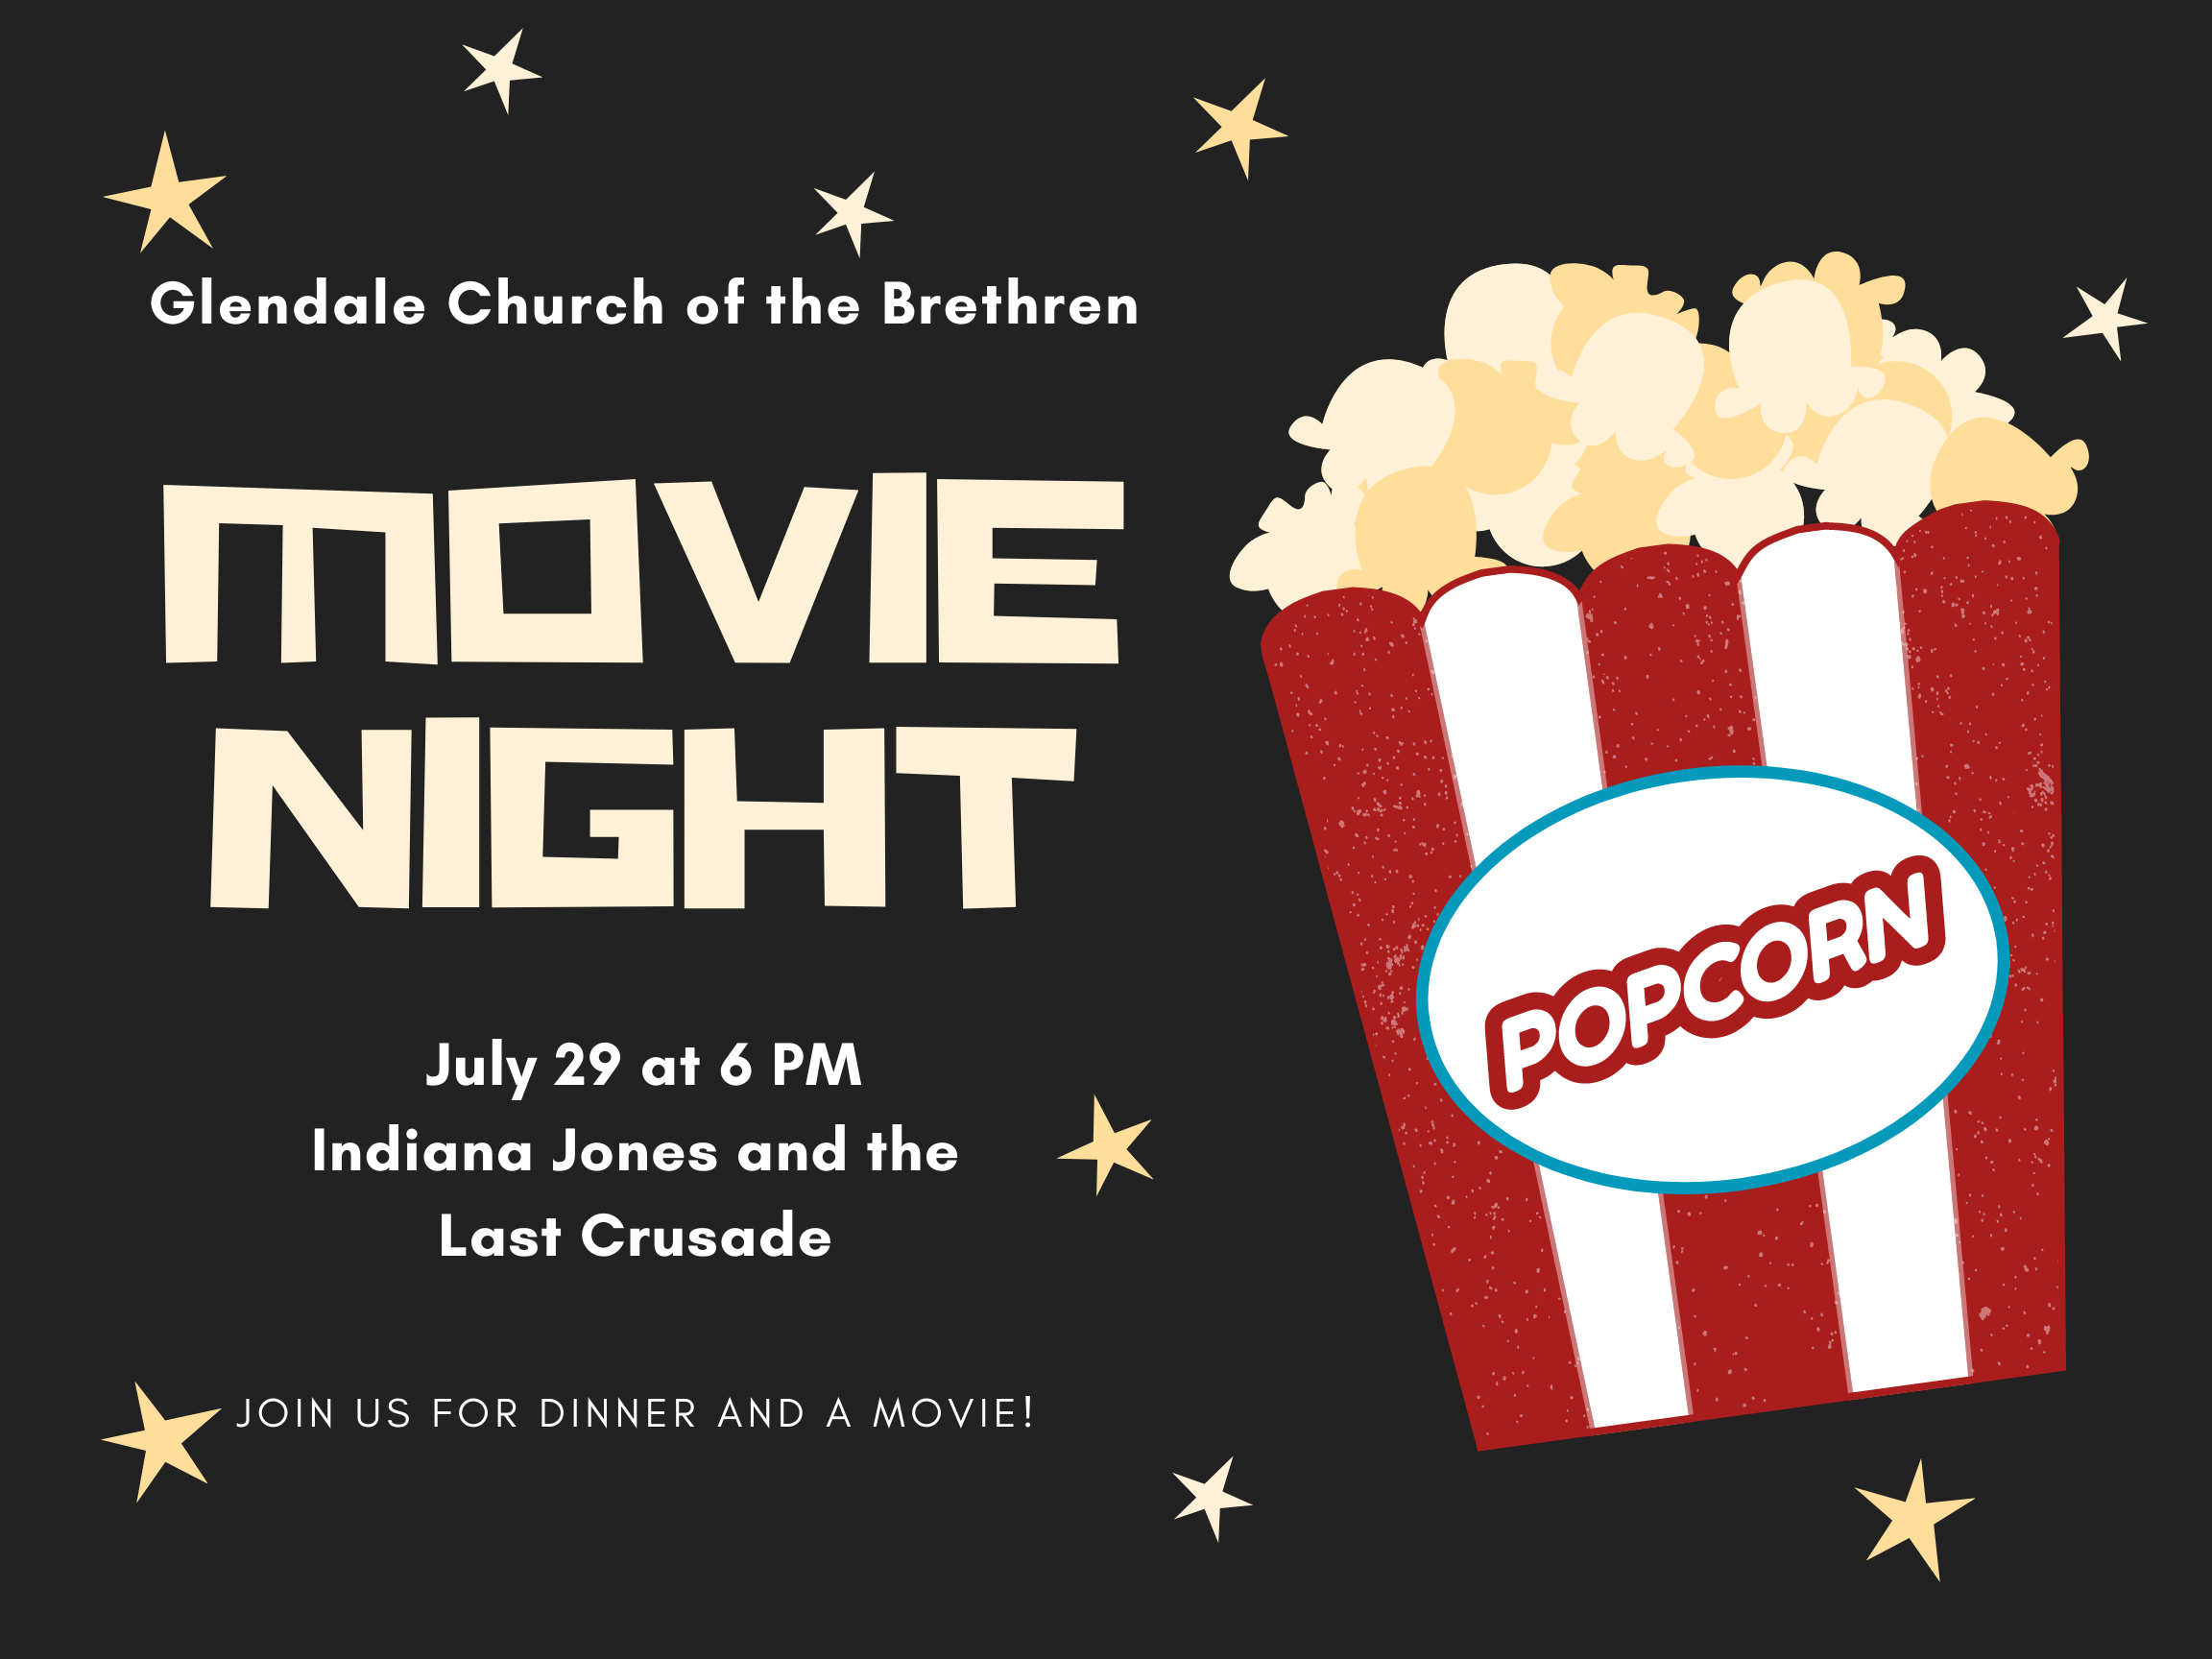 Church of the Brethren movie night with dinner will be on Friday July 29th at 6pm we will be watching Indiana Jones and the Last Crusade